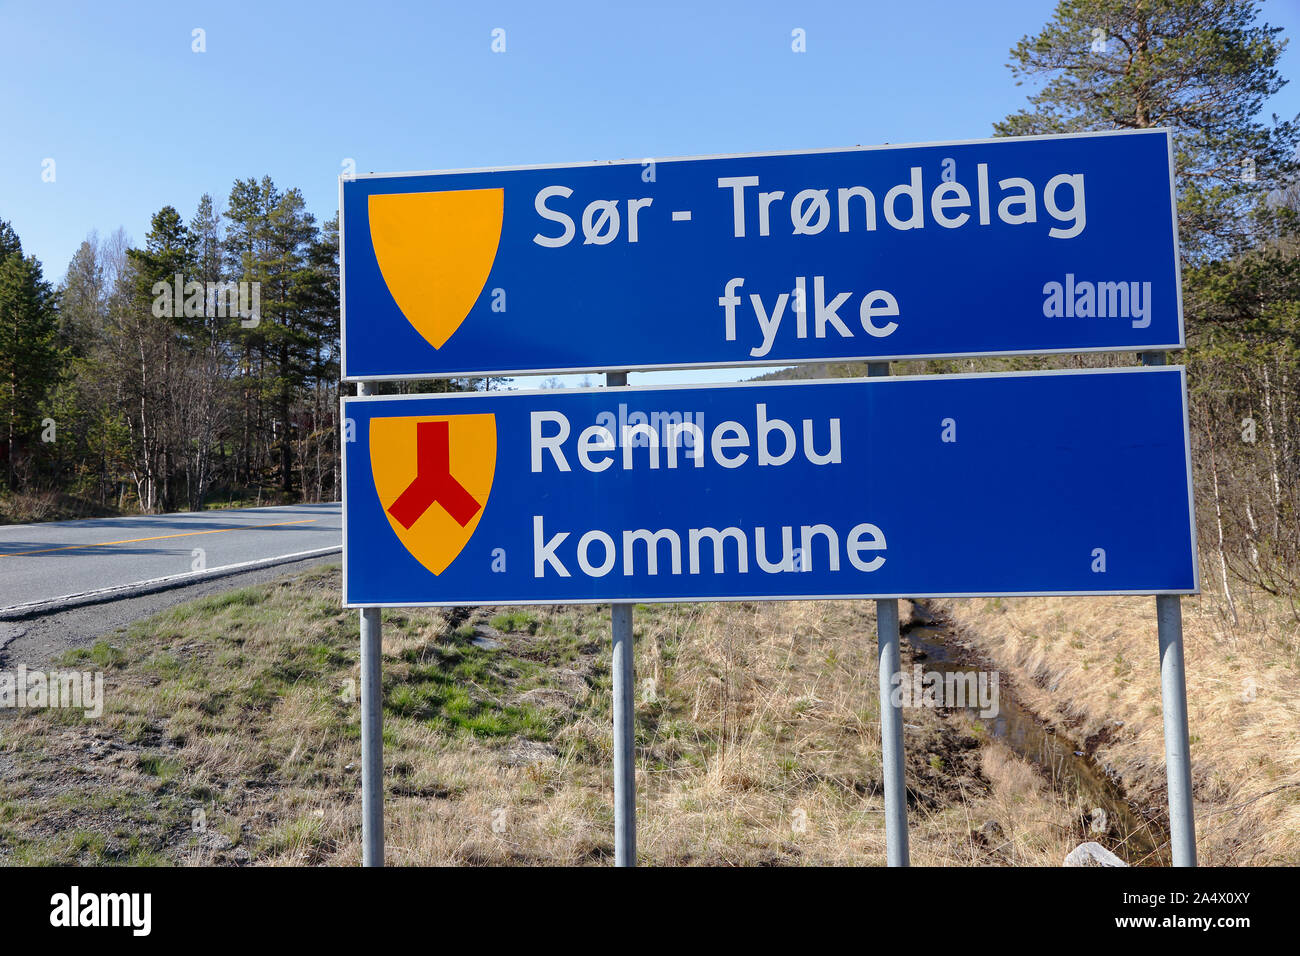 Rennebu, Norway - May 26, 2016: Roadsigns at the geographical border for the county boundary for Sor-Trondelag fylke and the municipal boundary for Re Stock Photo